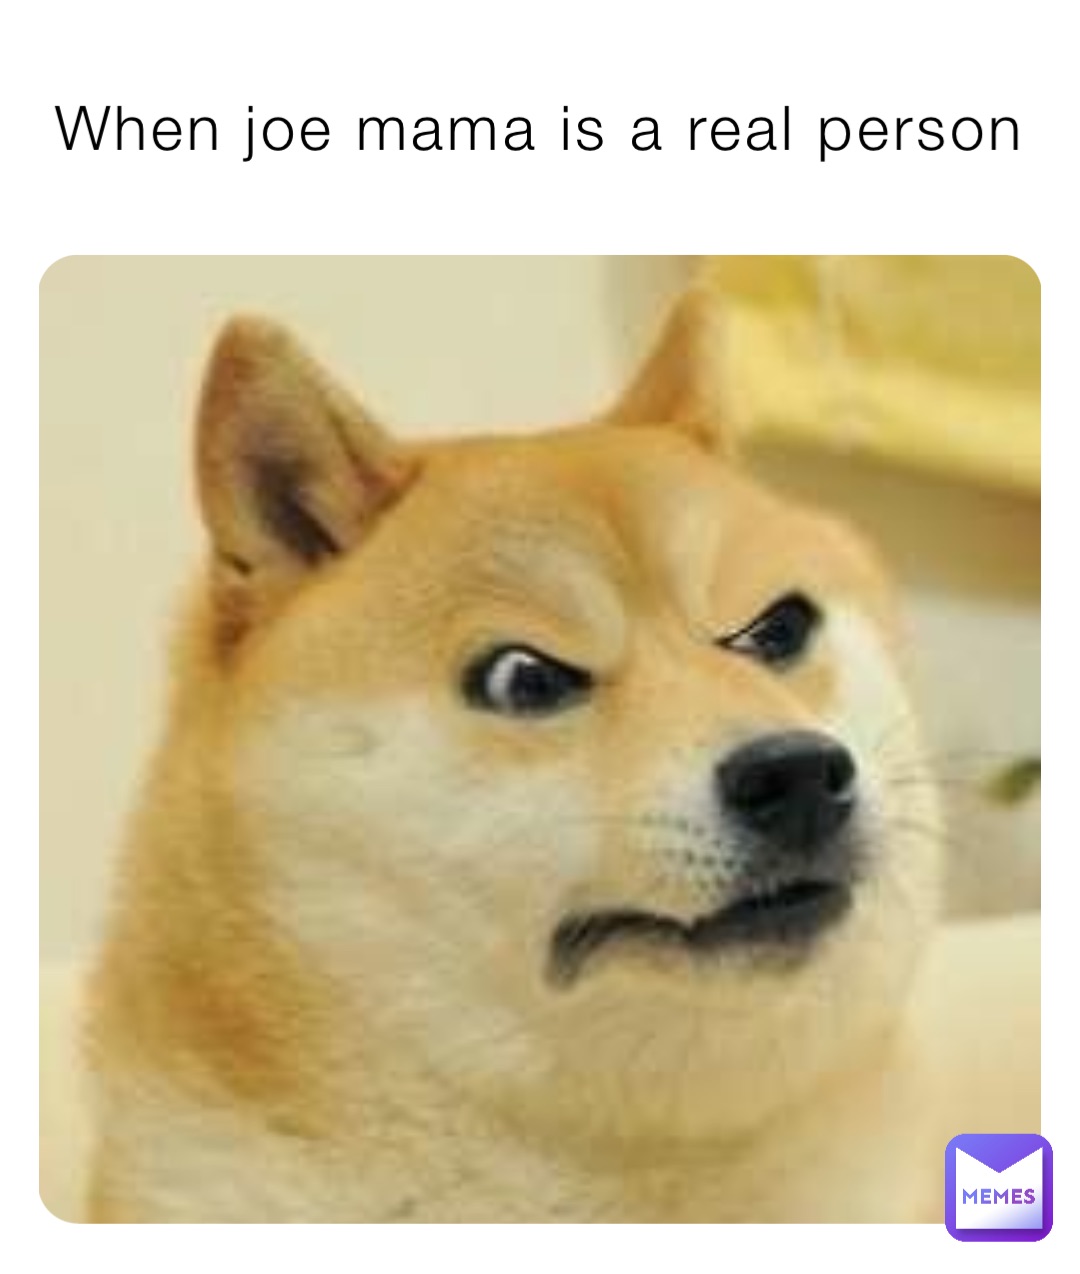 When joe mama is a real person